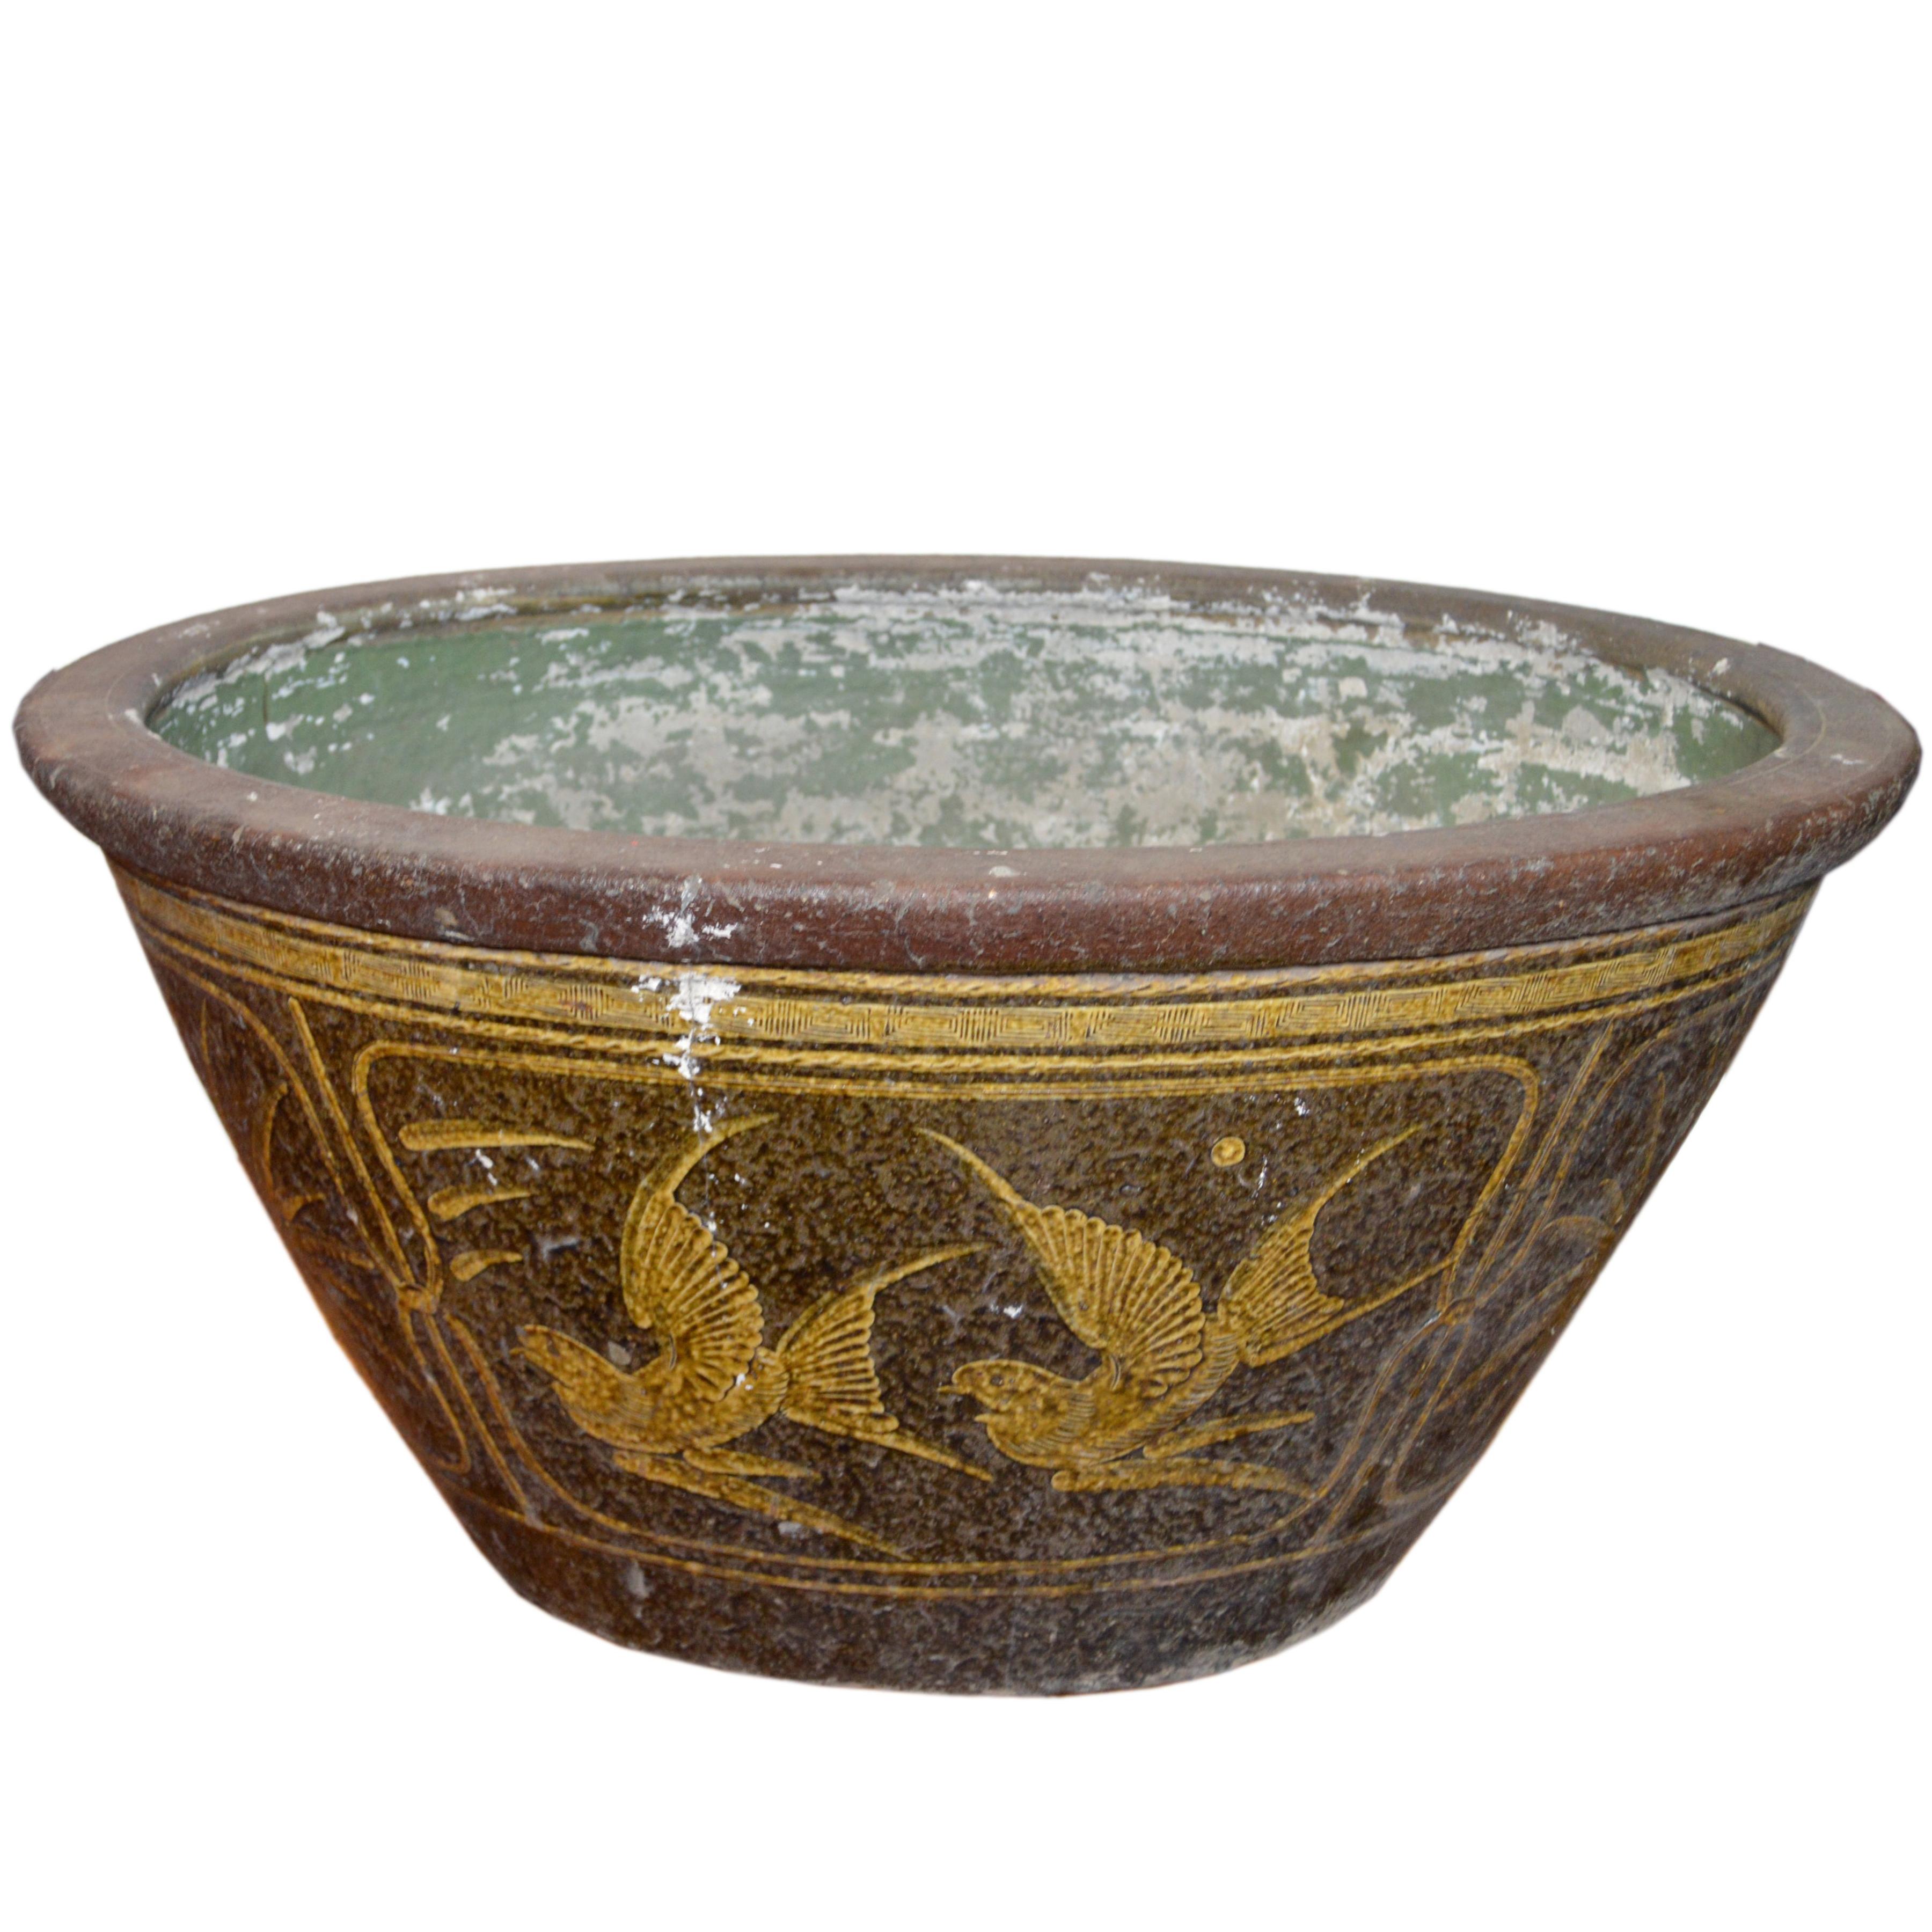 19th Century Southern Chinese Painted Ceramic Bathtub from Annan with Greek Key For Sale